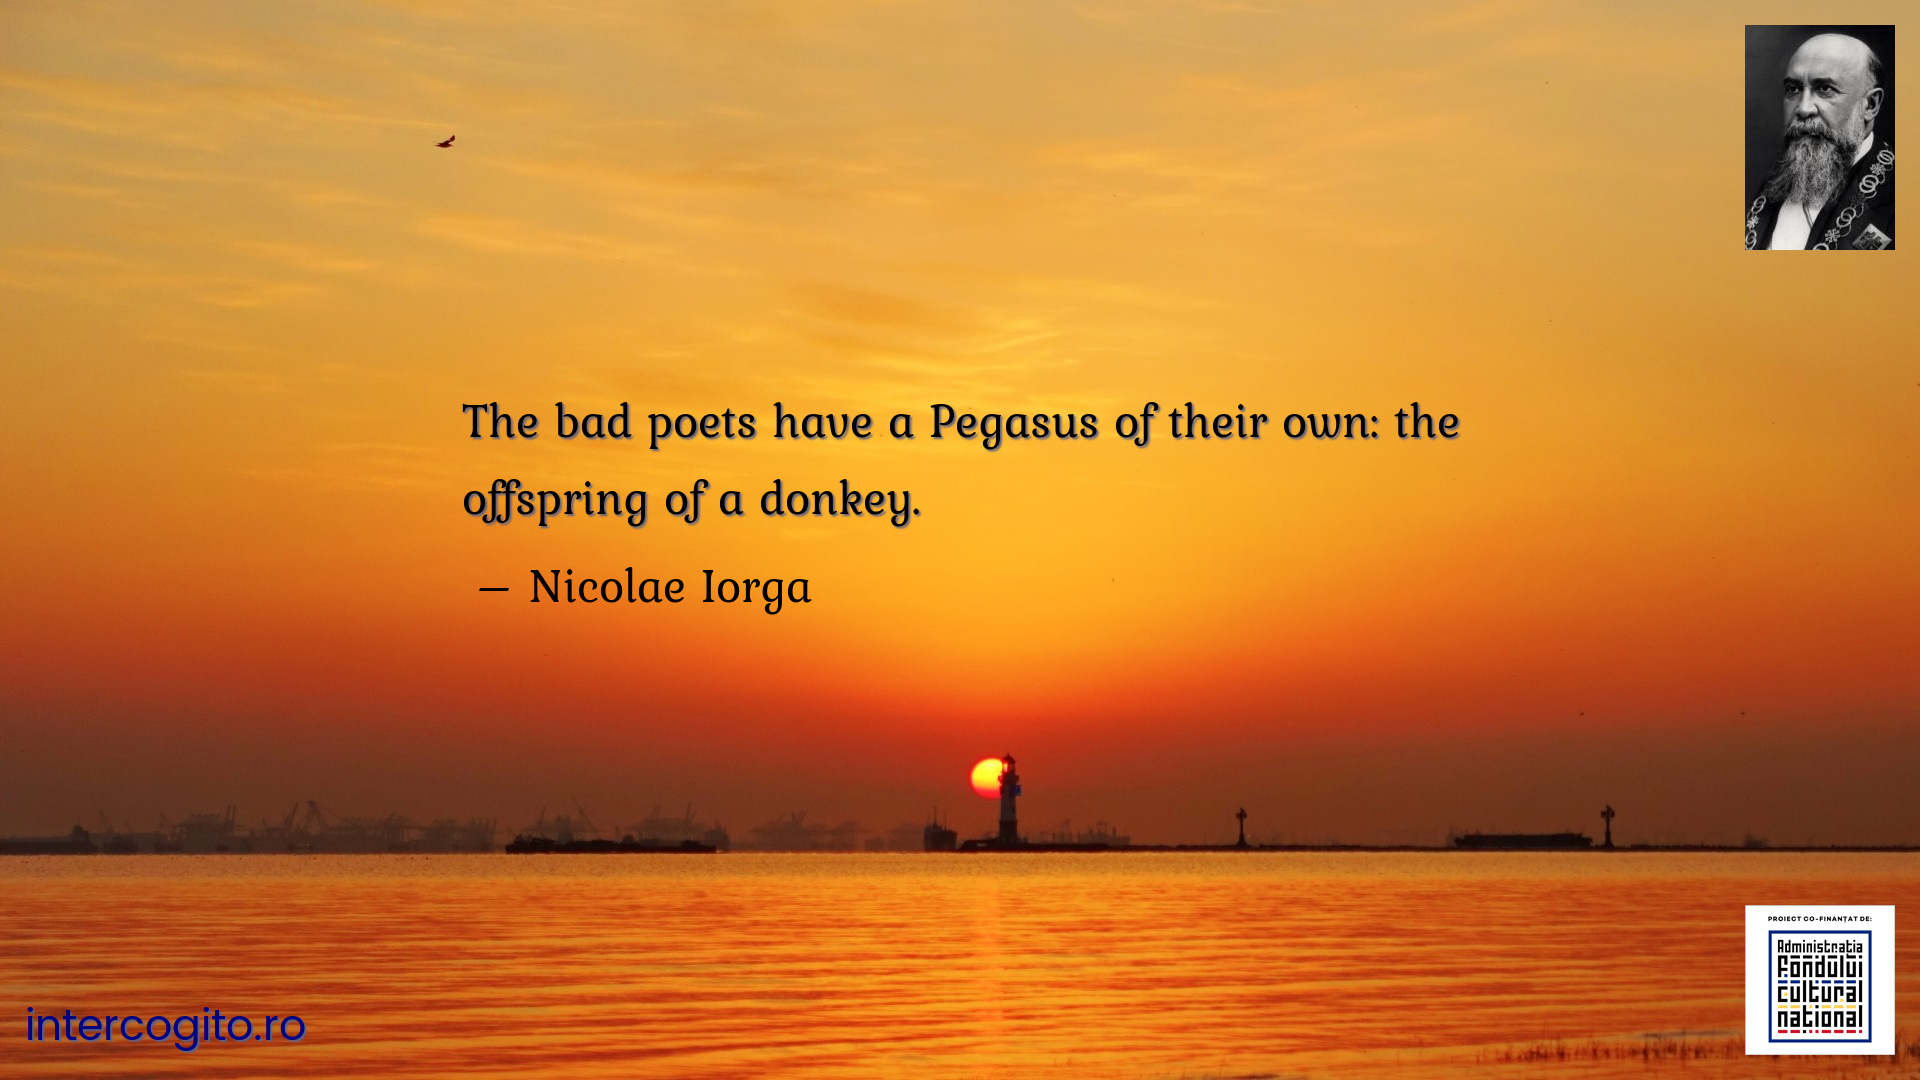 The bad poets have a Pegasus of their own: the offspring of a donkey.